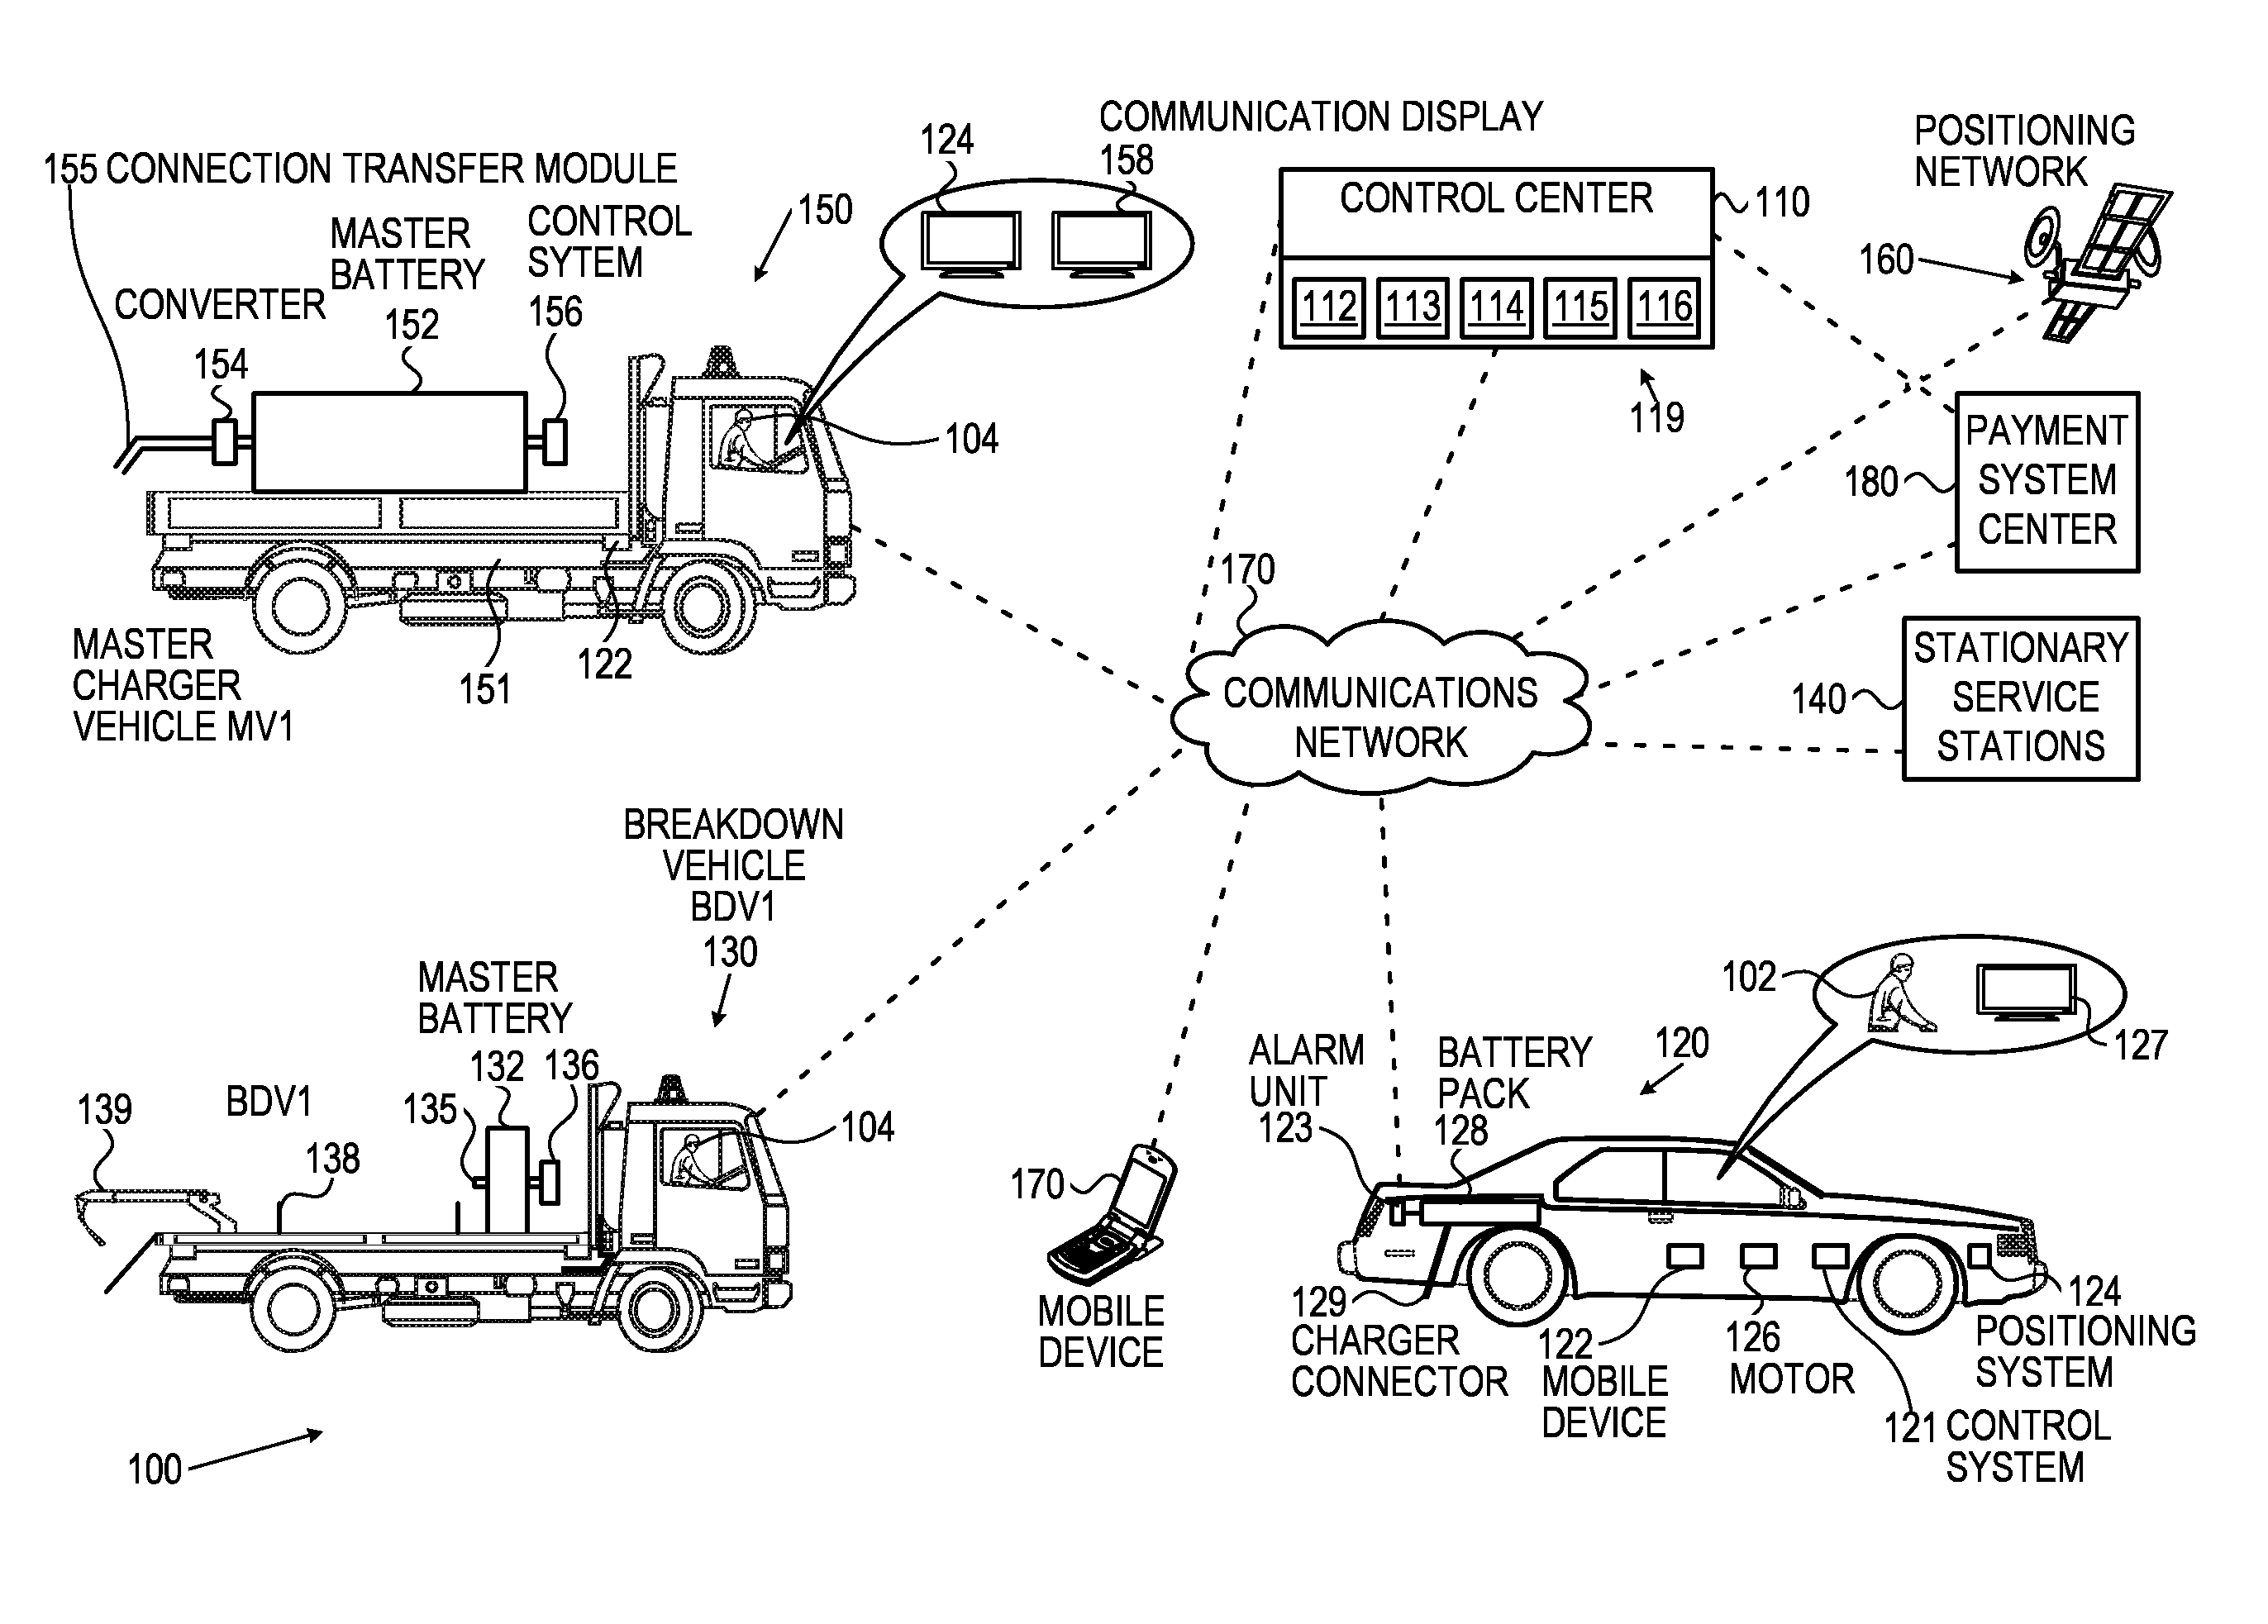 Real-time system and method for tracking, locating and recharging electric vehicles in transit